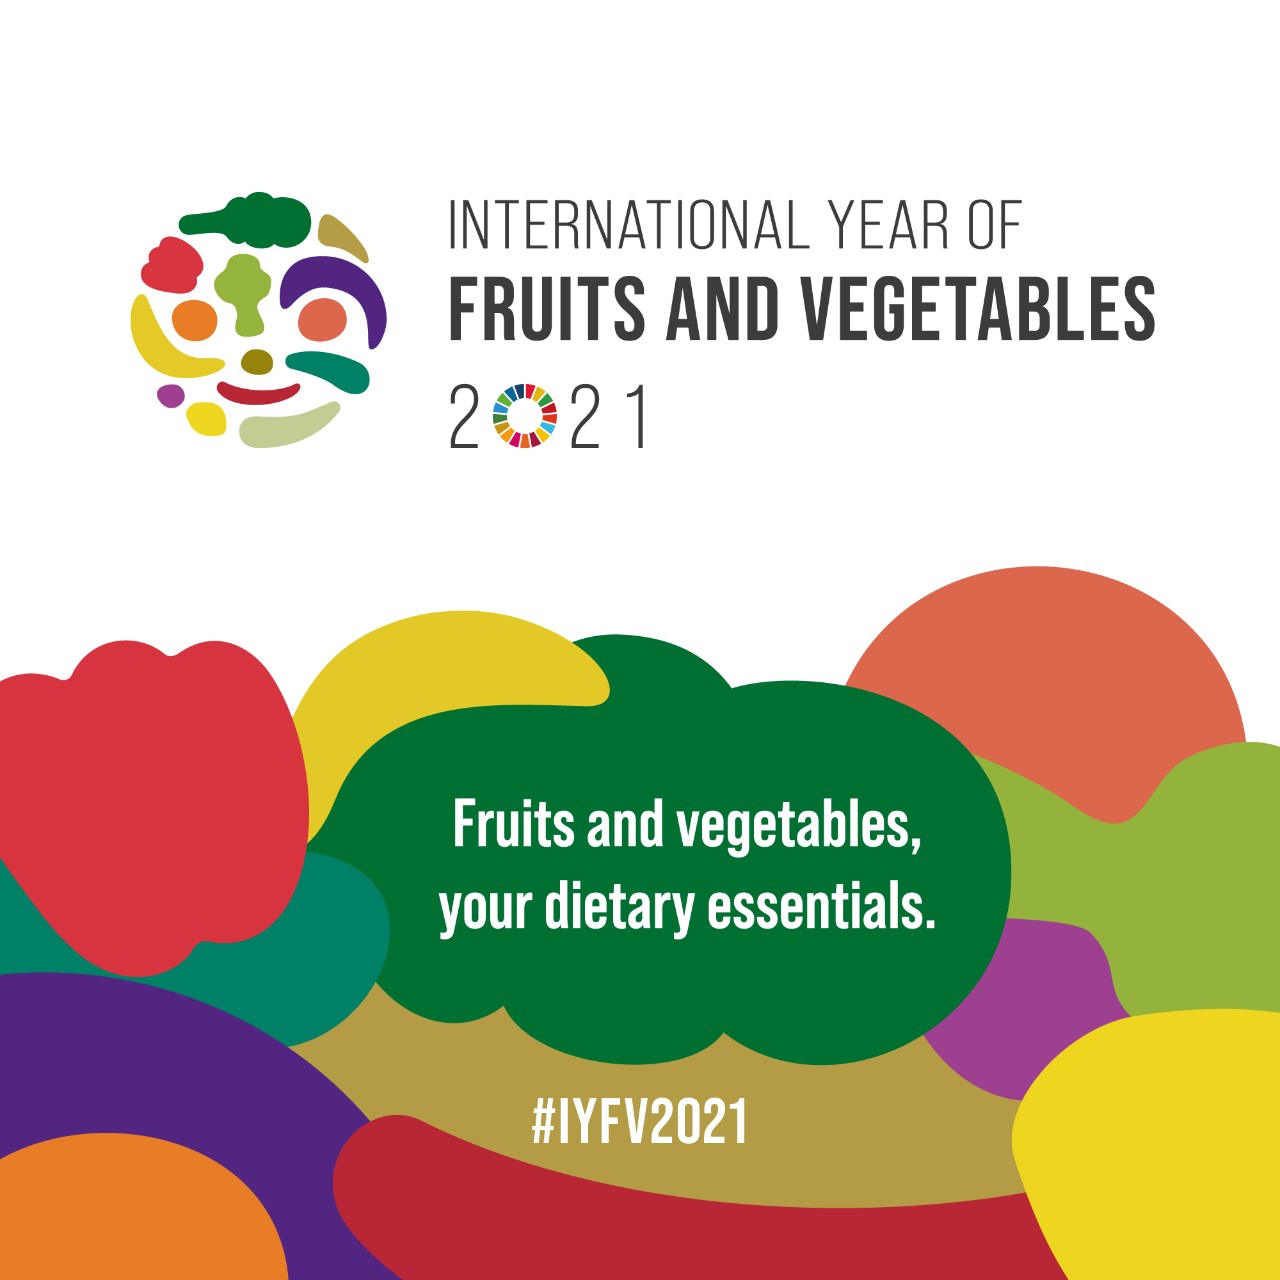 International year of fruits and vegetables 2021